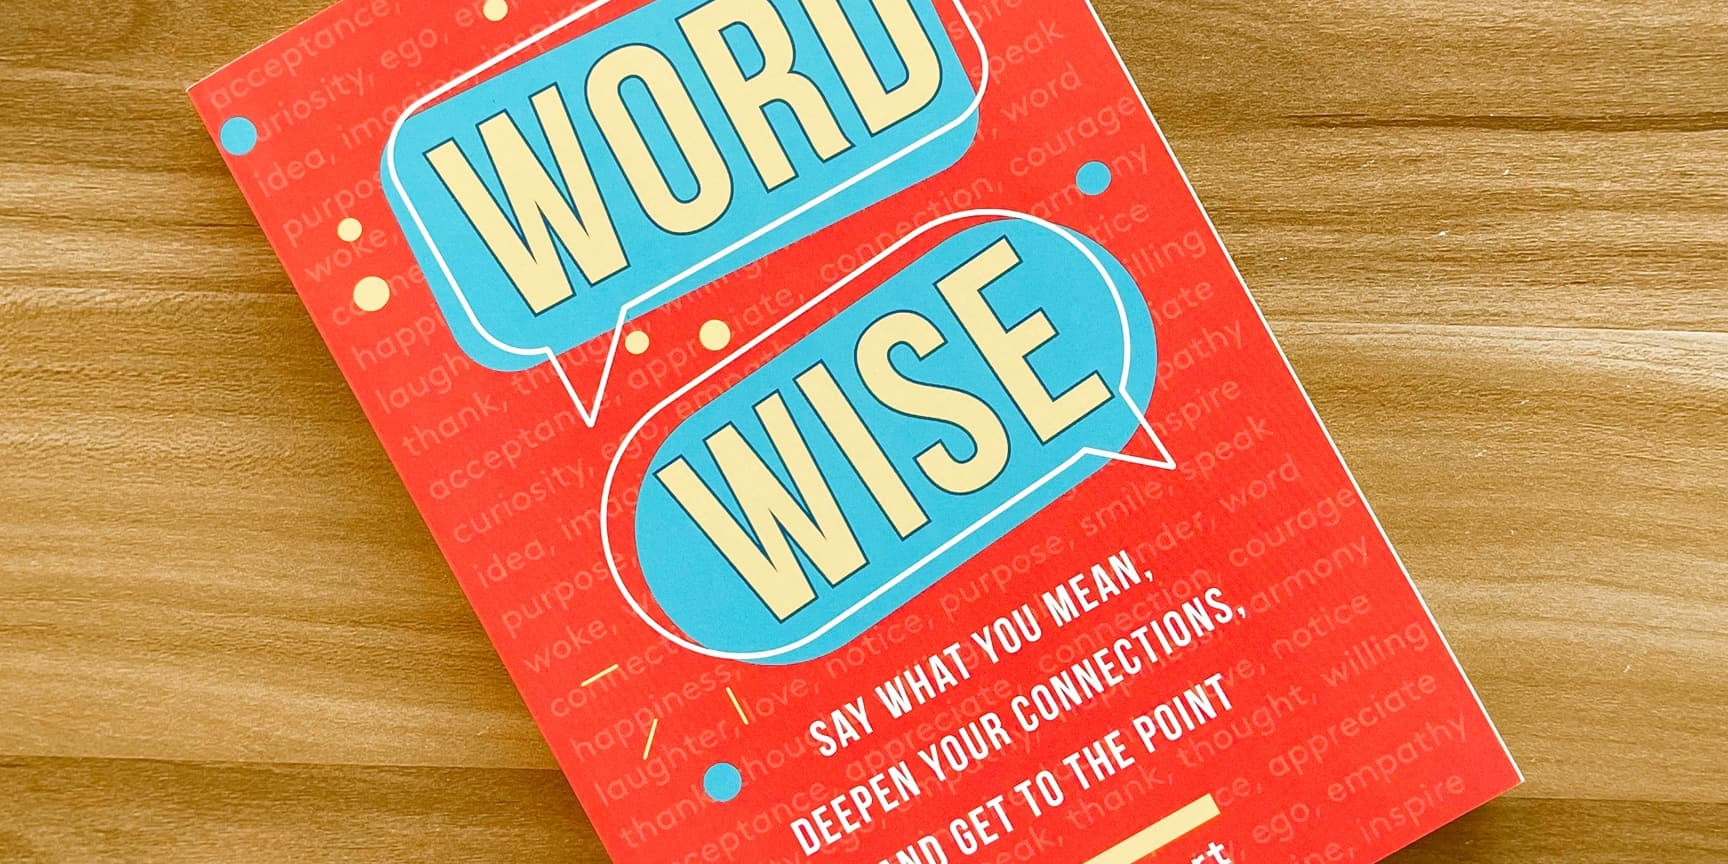 10 Thought-Provoking Quotes from "Word Wise" by Will Jelbert